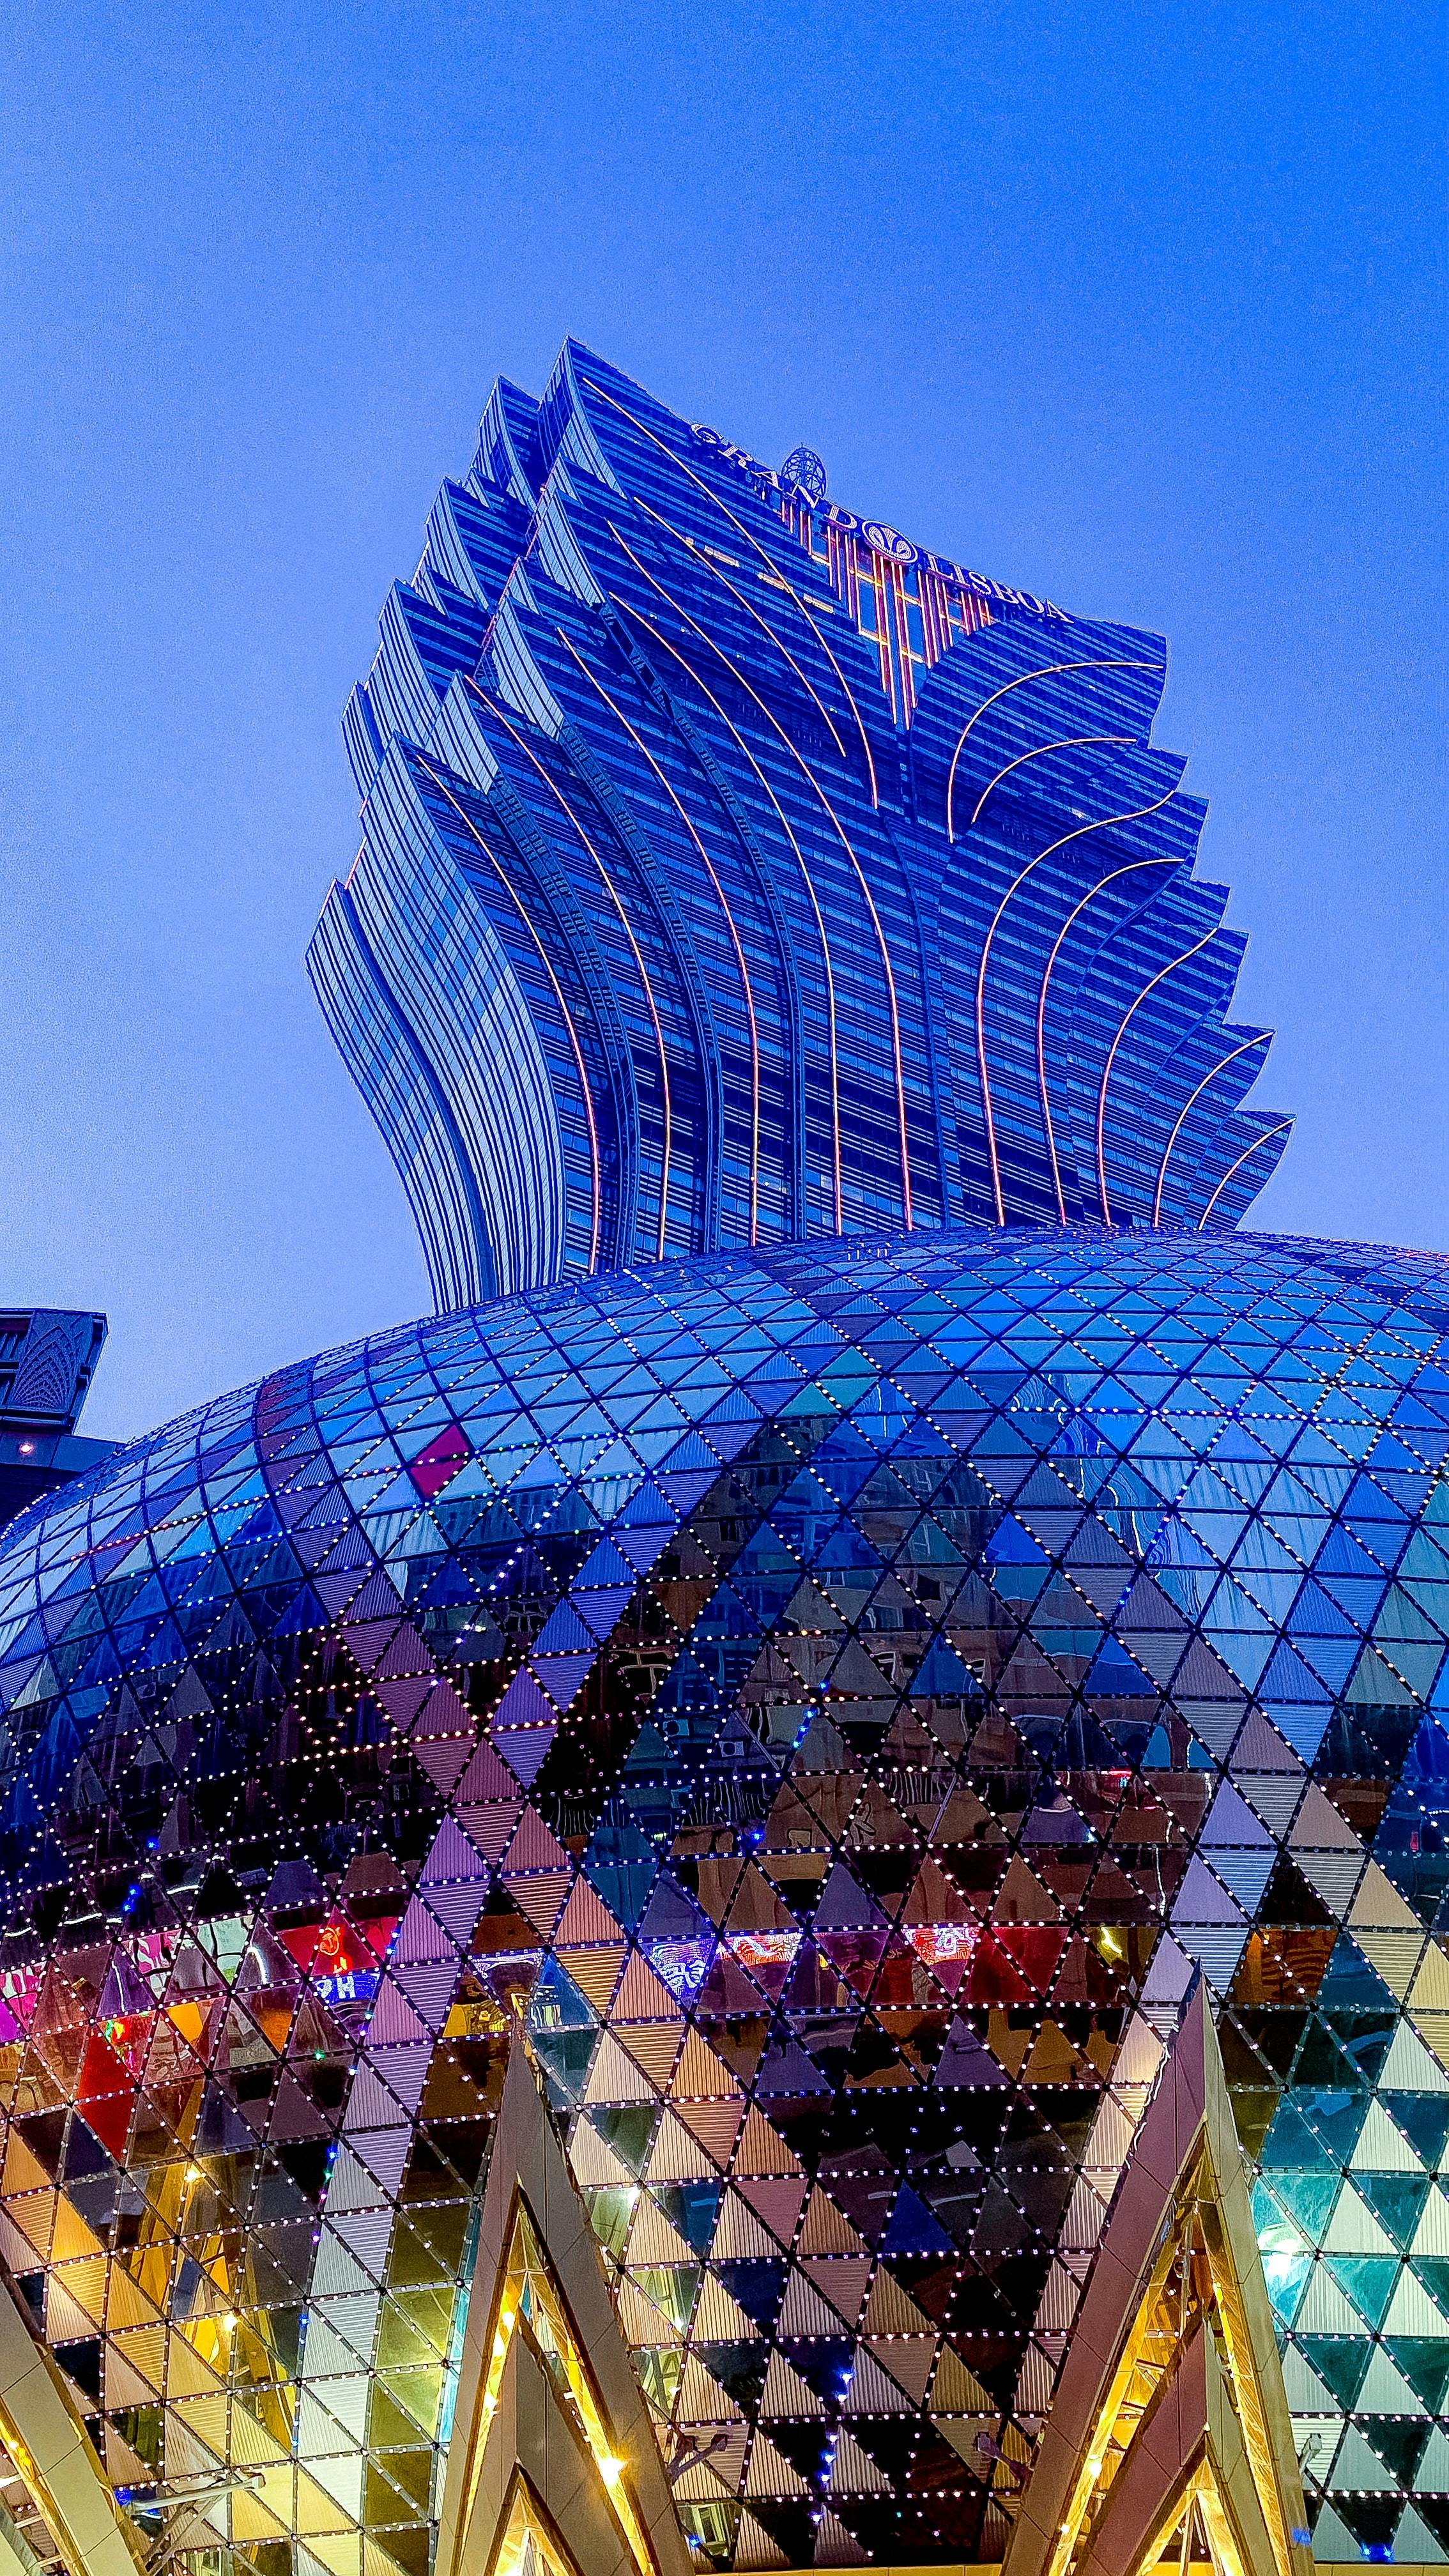 A colorful mirrored tower